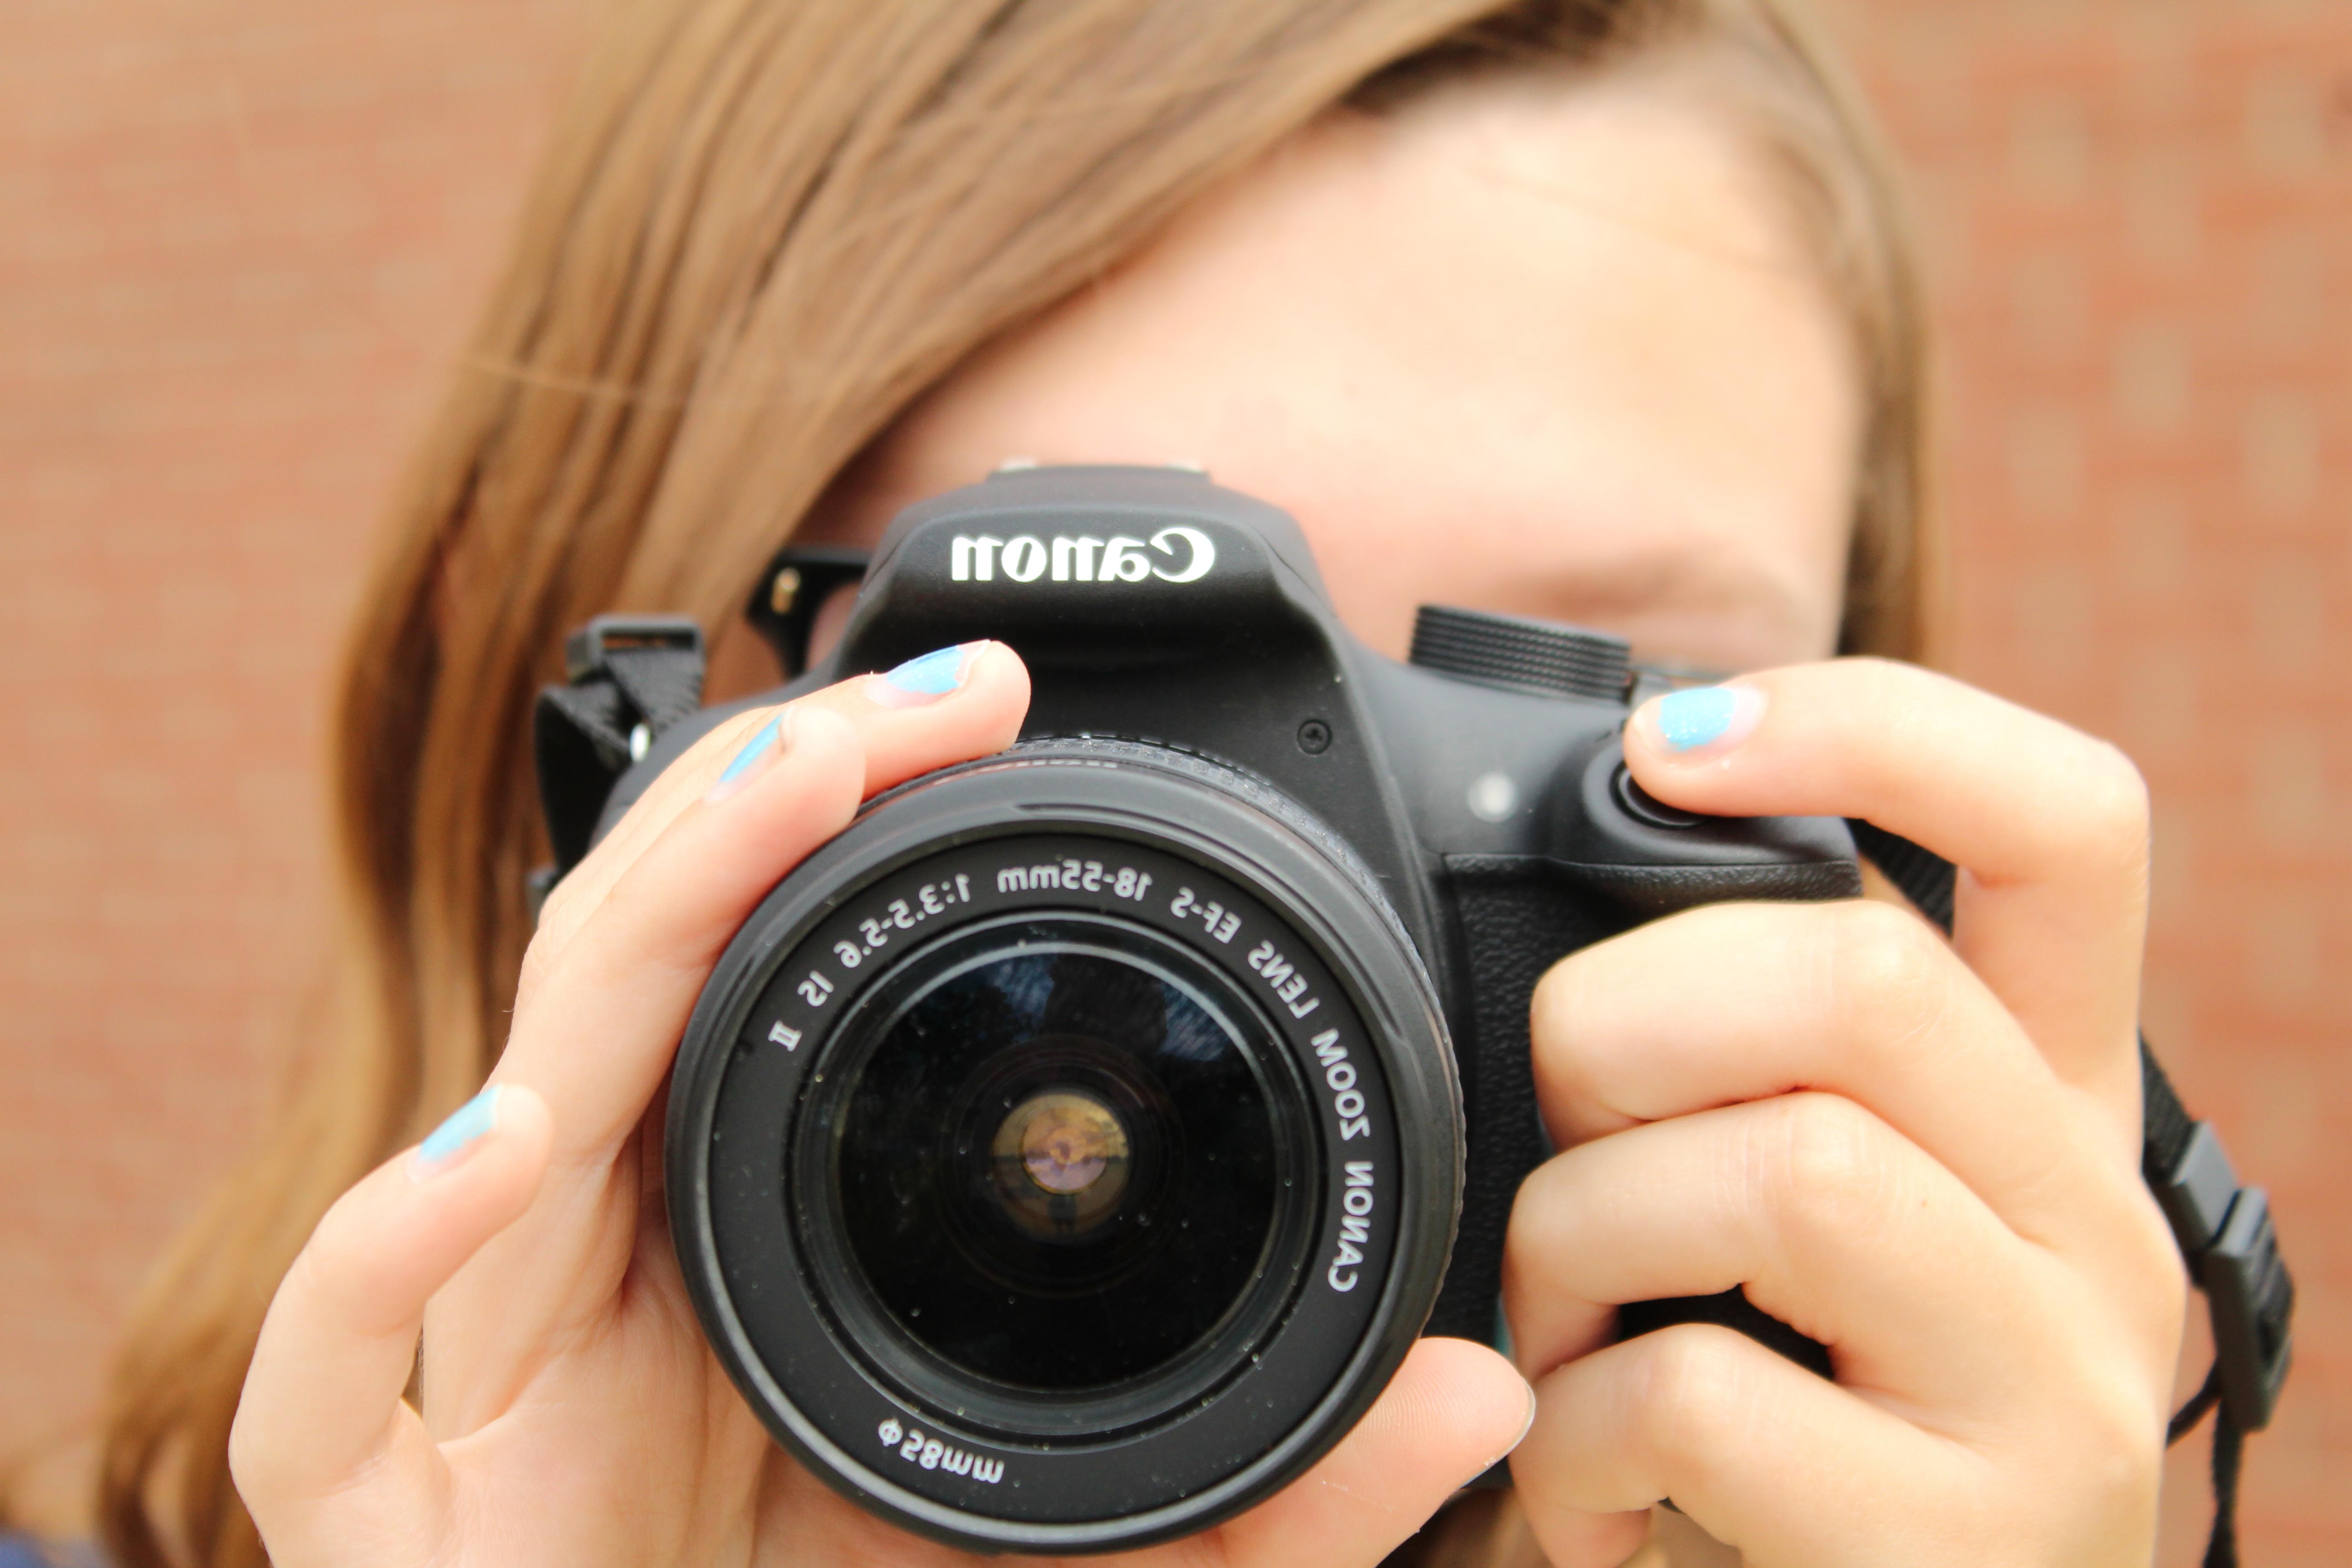 A female student holding a camera